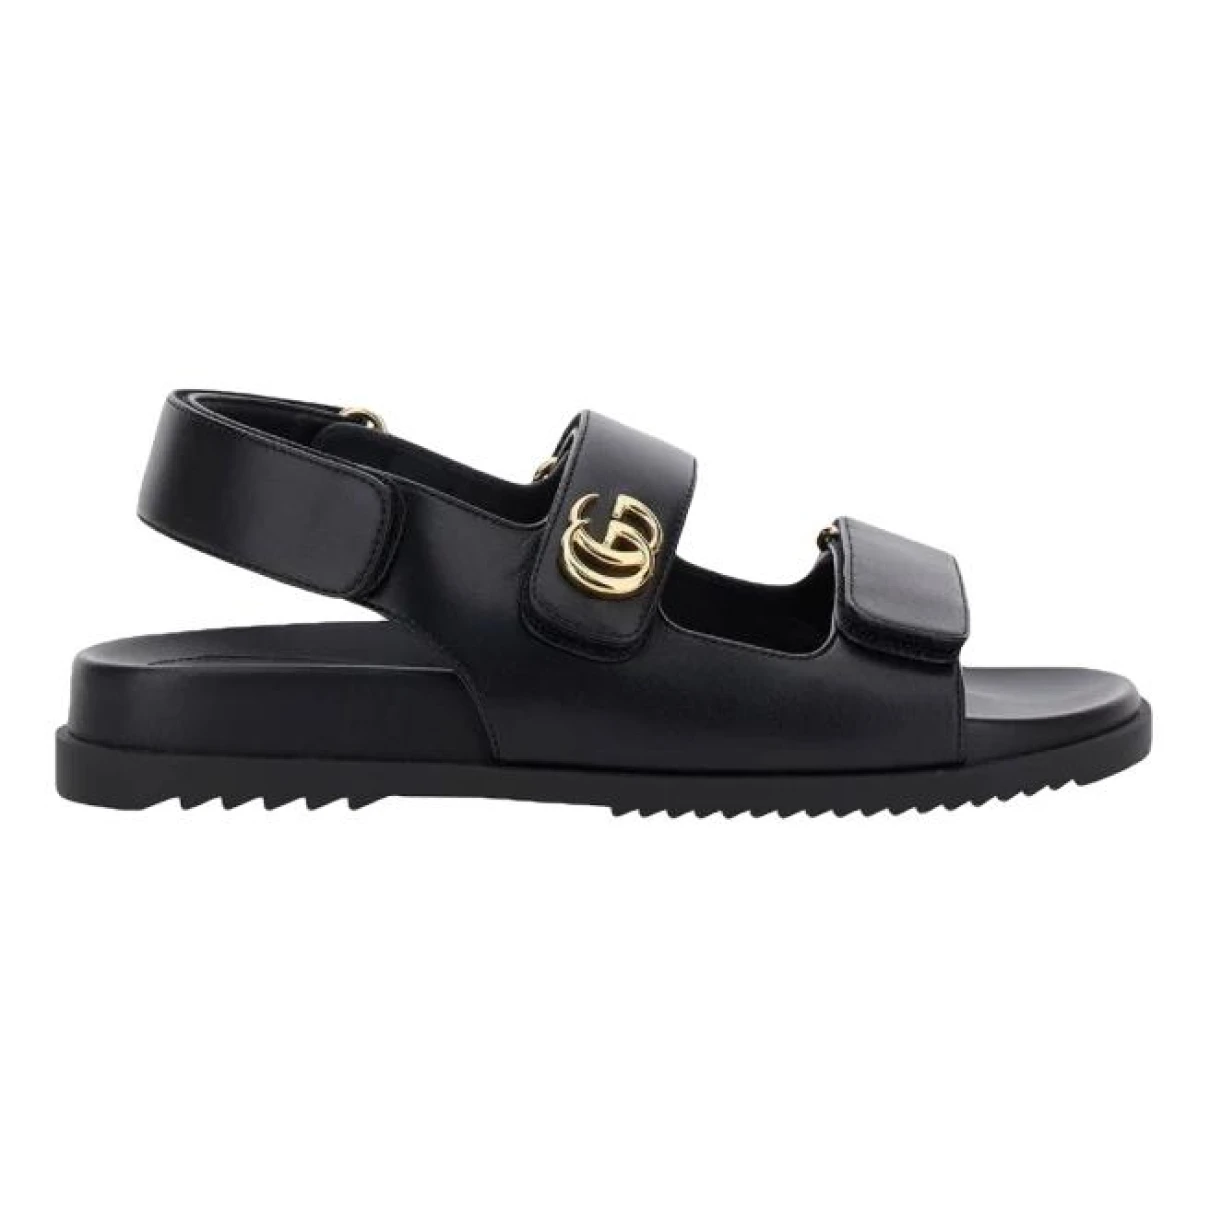 shoes Gucci sandals Double G for Female Leather 35.5 EU. Used condition